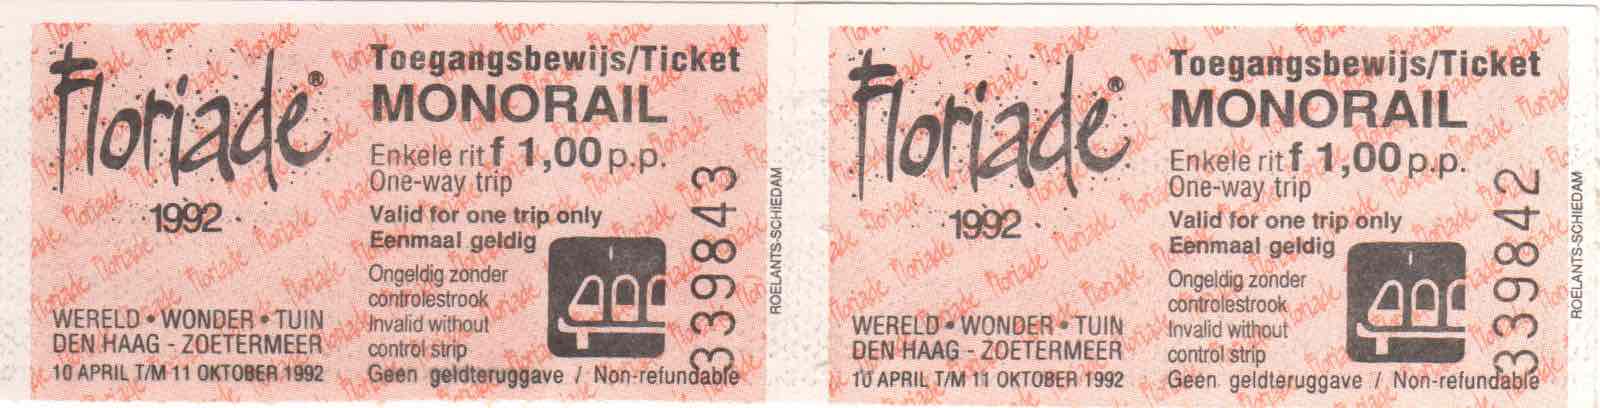 Onsite monorail ticket Floriade (1992)